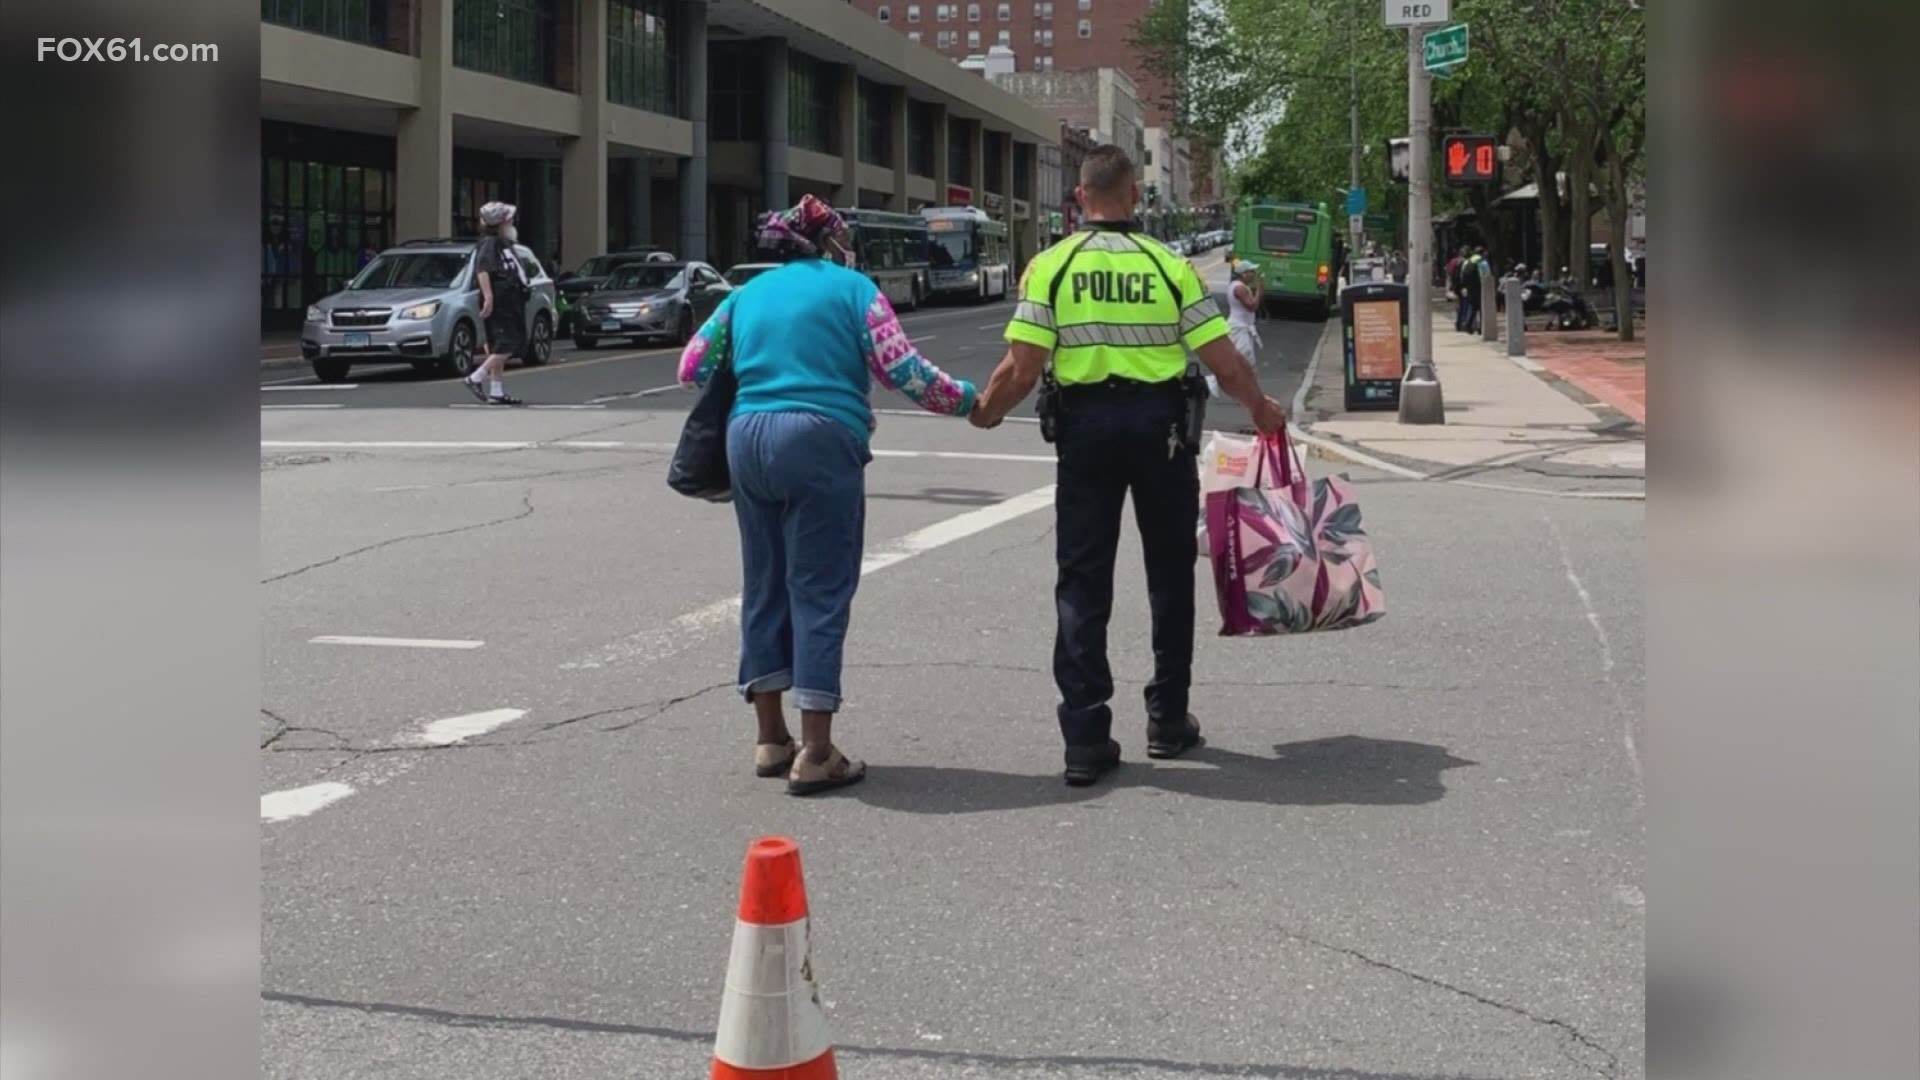 Workers from the Regional Water Authority posted a picture of the officer helping a woman cross the street.